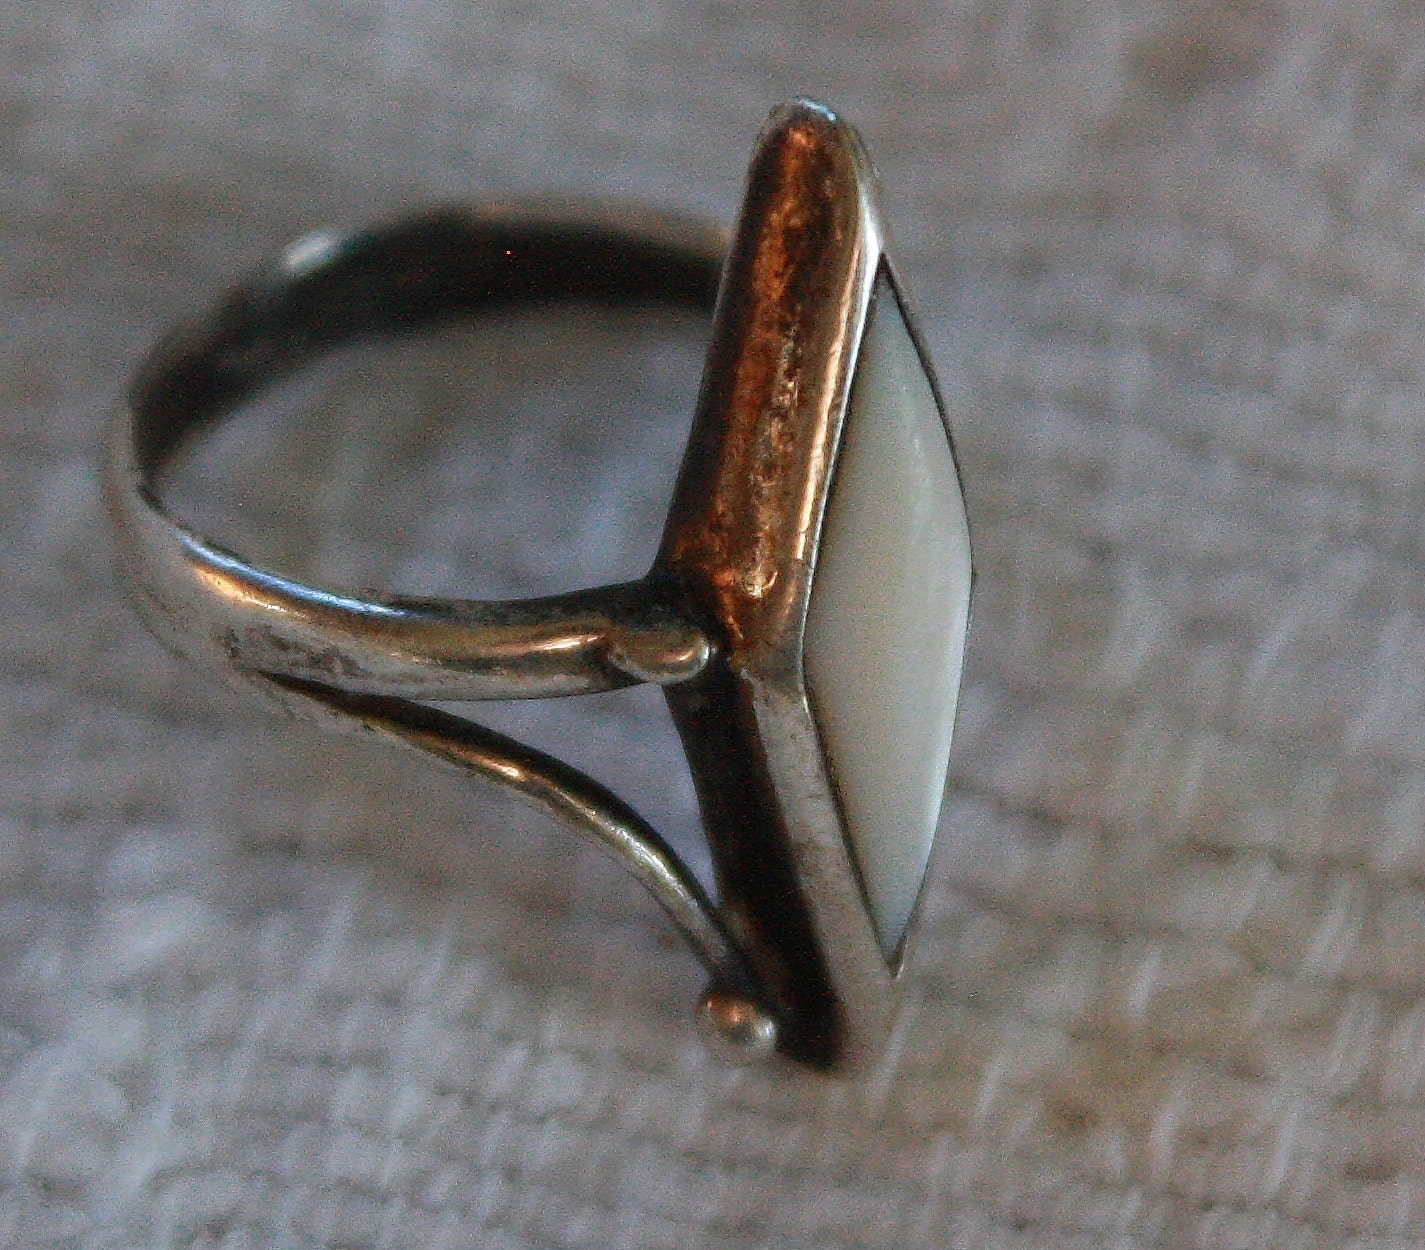 1970s ring. hipster ring. vintage ring. The body of the ring